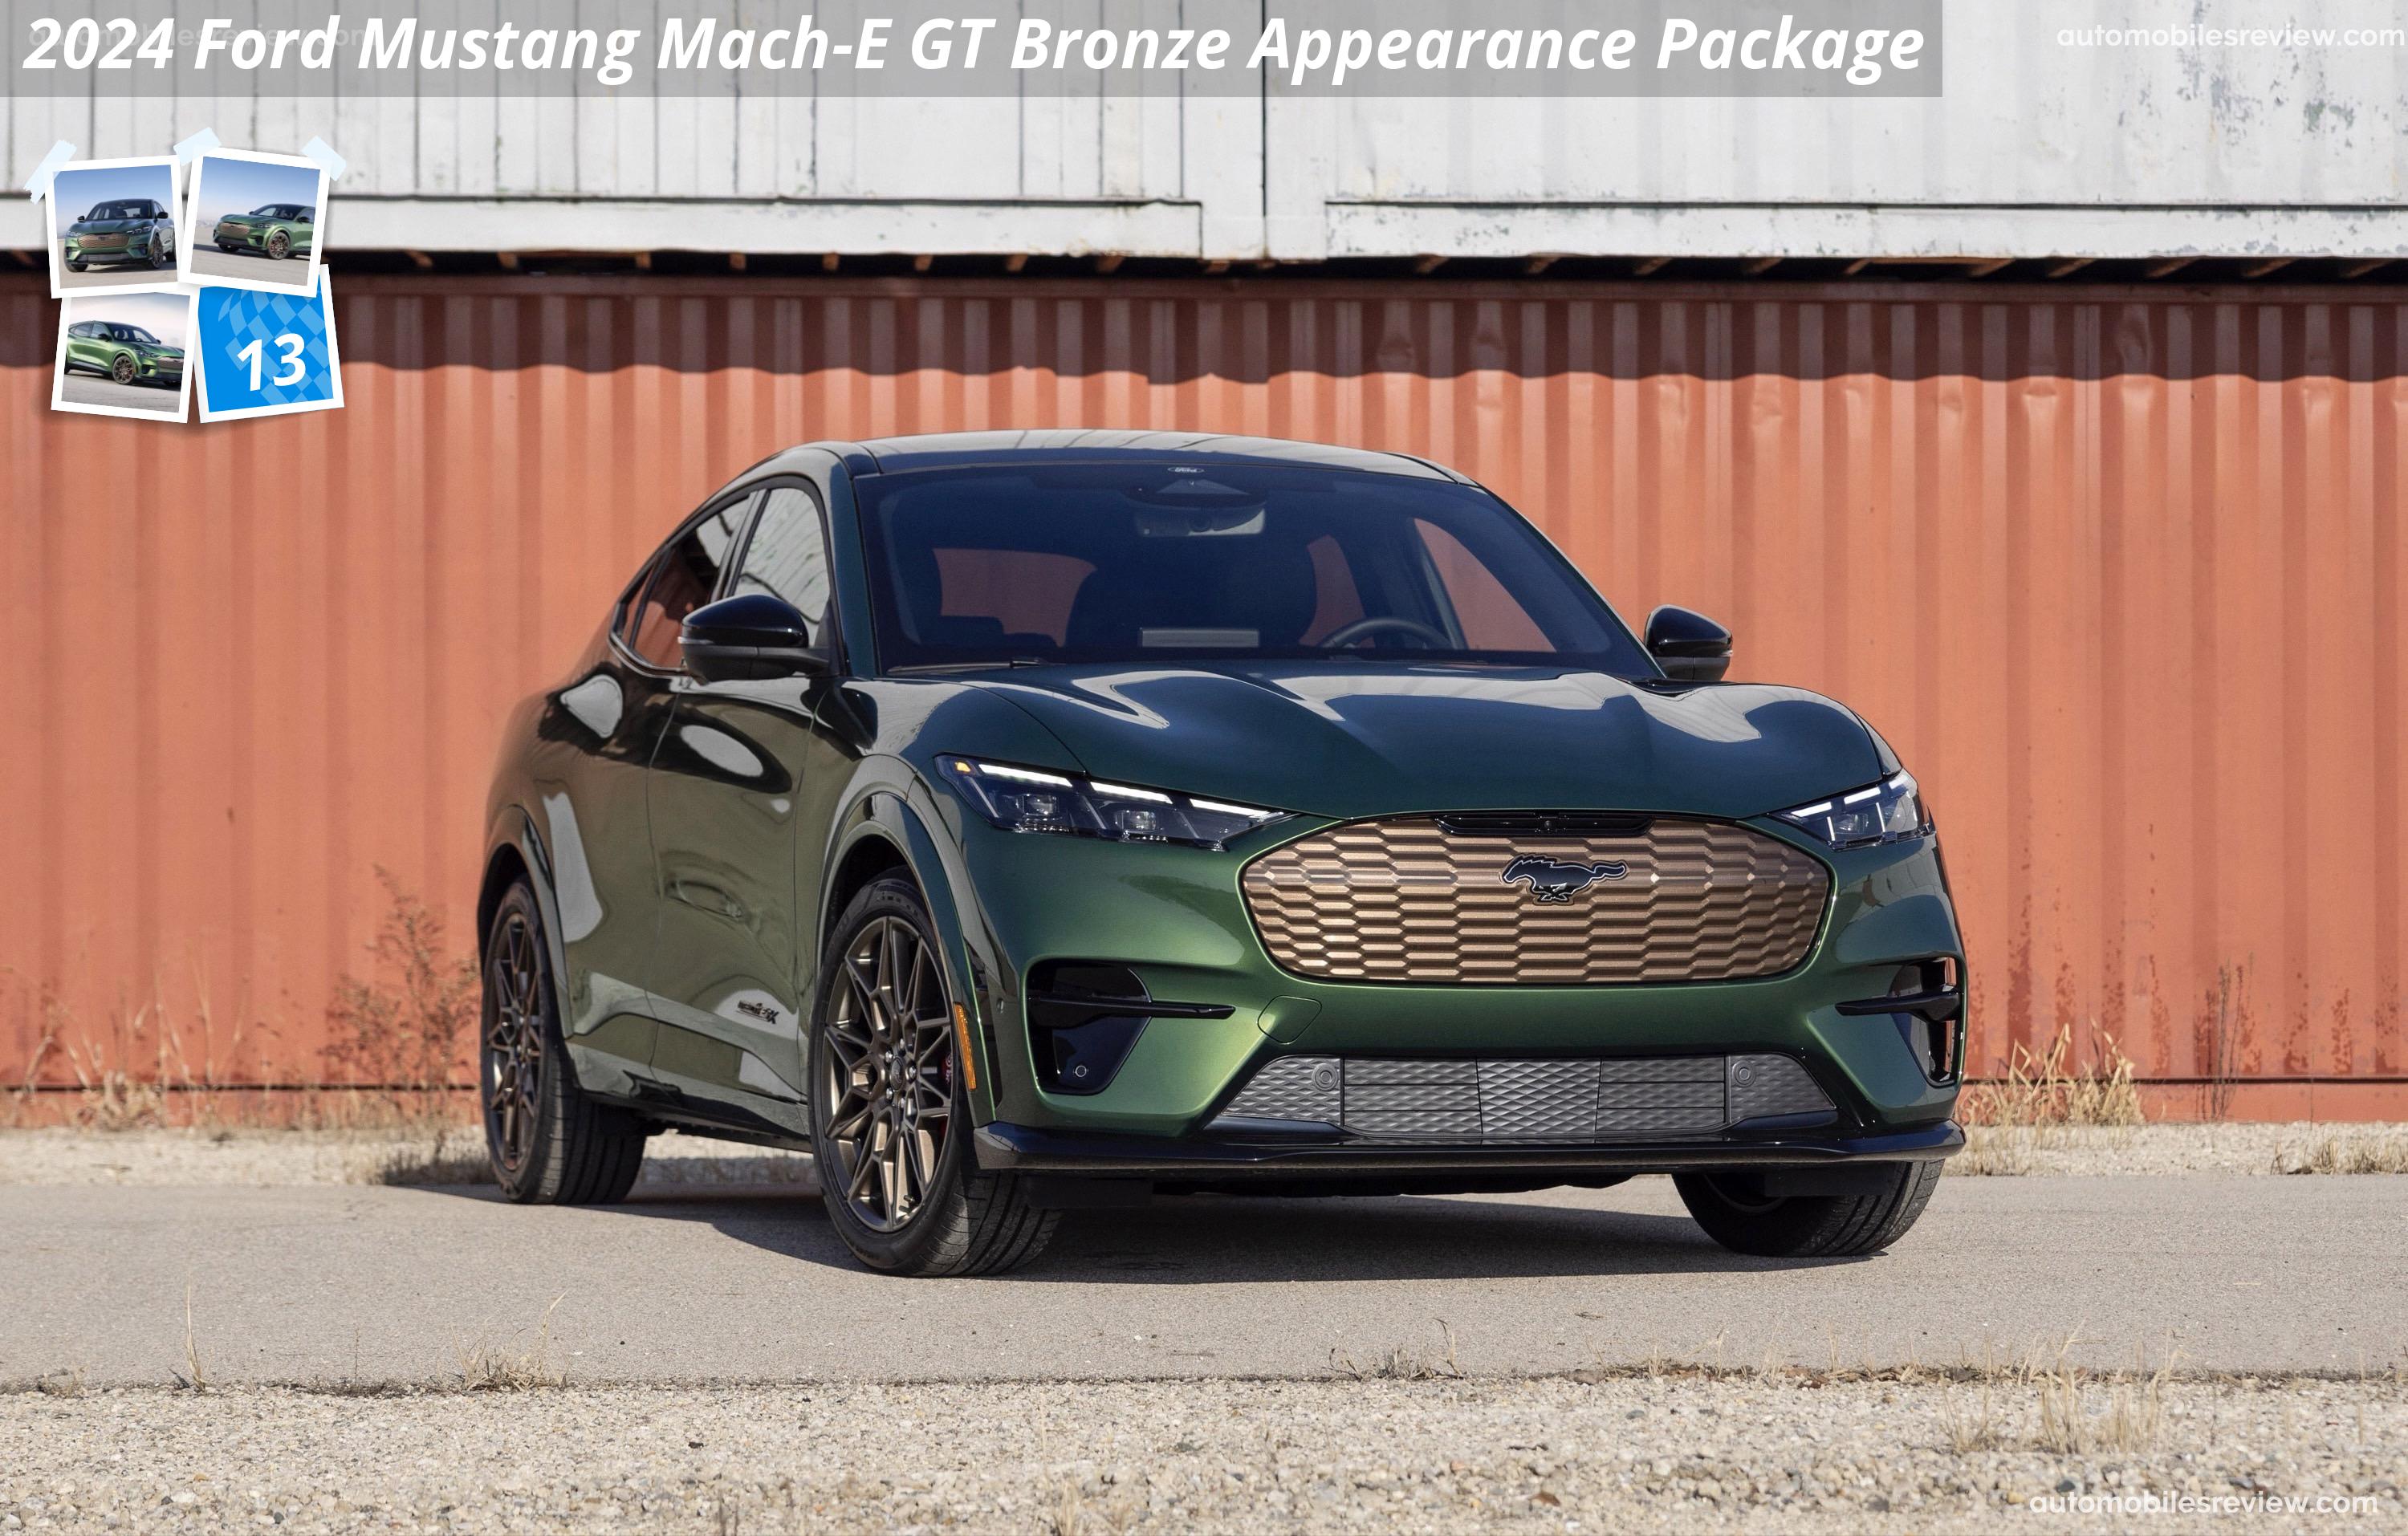 Ford Mustang Mach-E GT Bronze Appearance Package (2024)